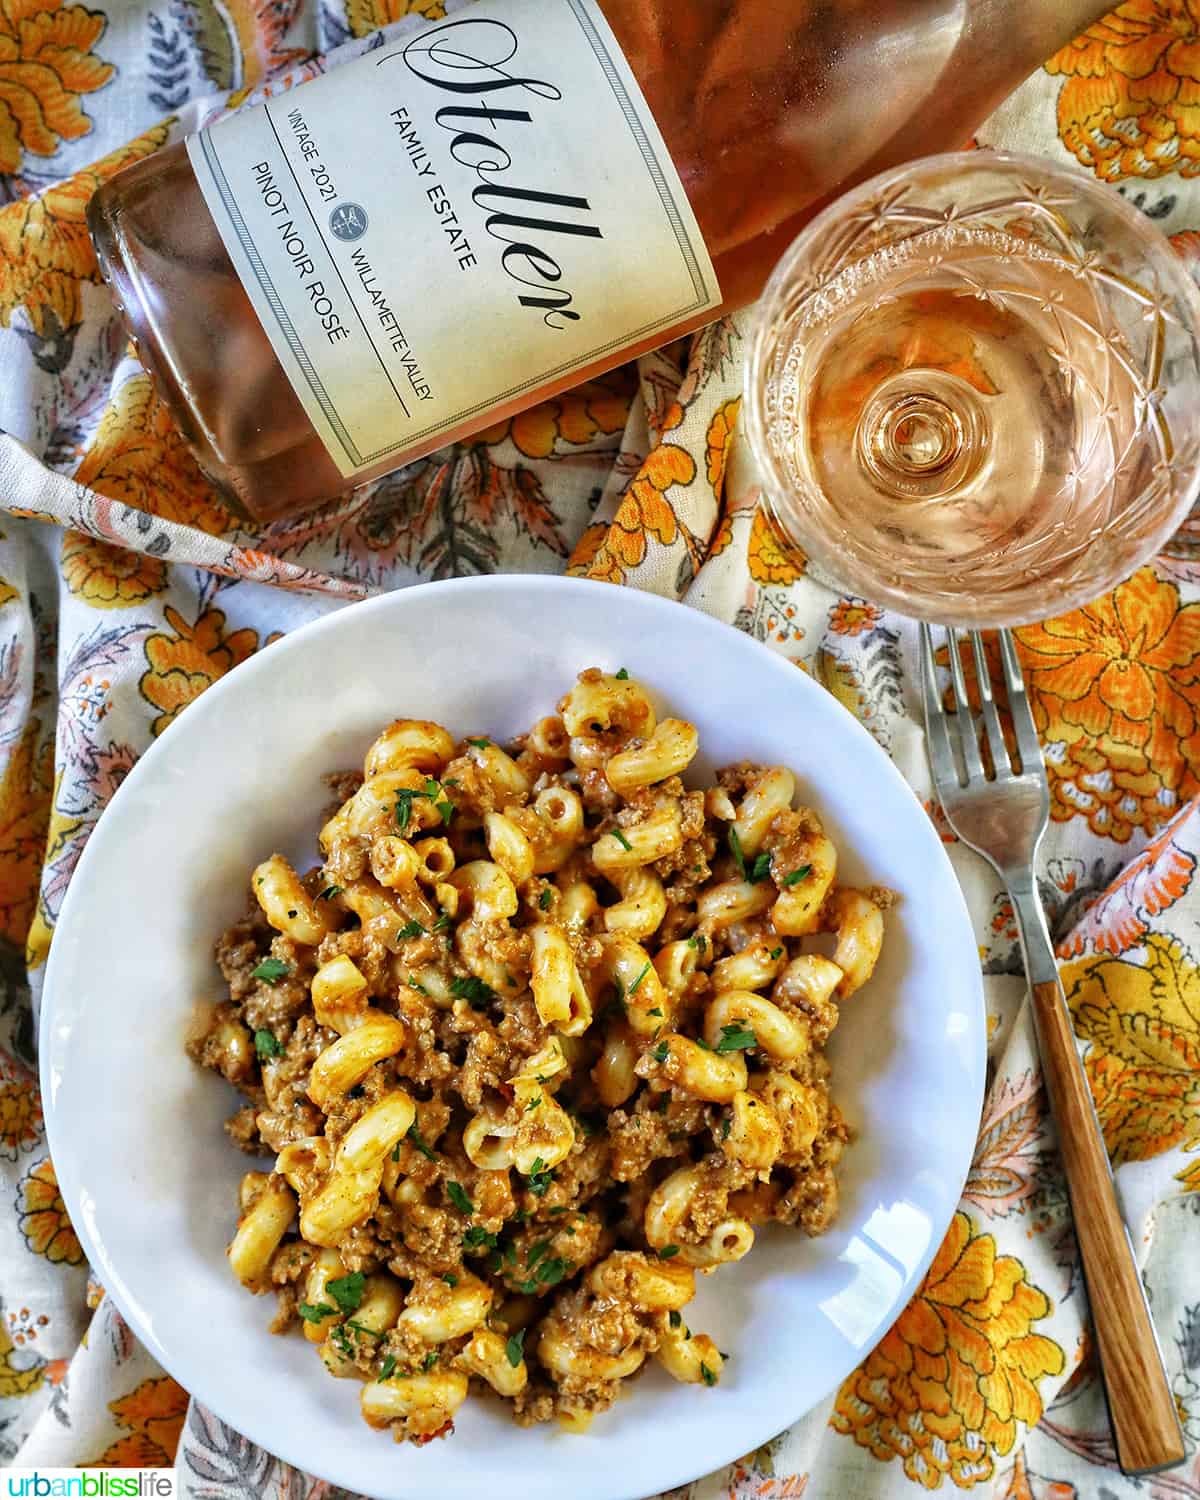 bowl of dairy free cheeseburger pasta on colorful napkins with bottle and glass of rosé wine.